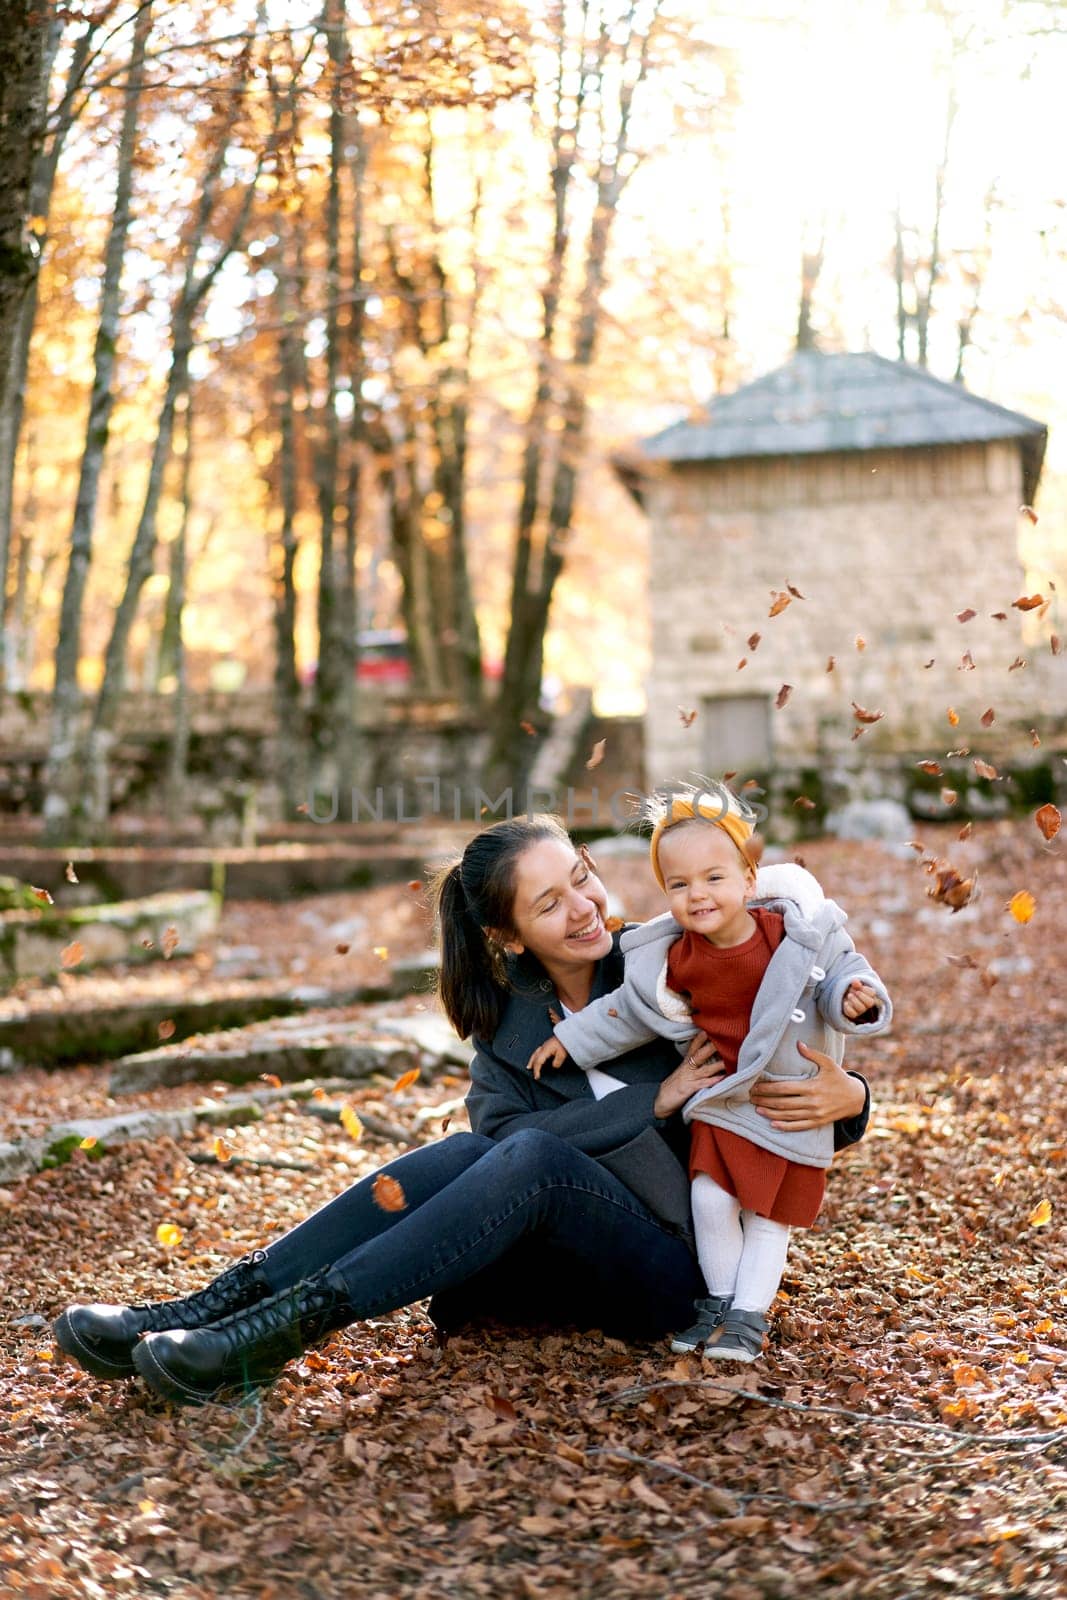 Smiling mother hugging little girl sitting on the ground in the park under falling leaves by Nadtochiy